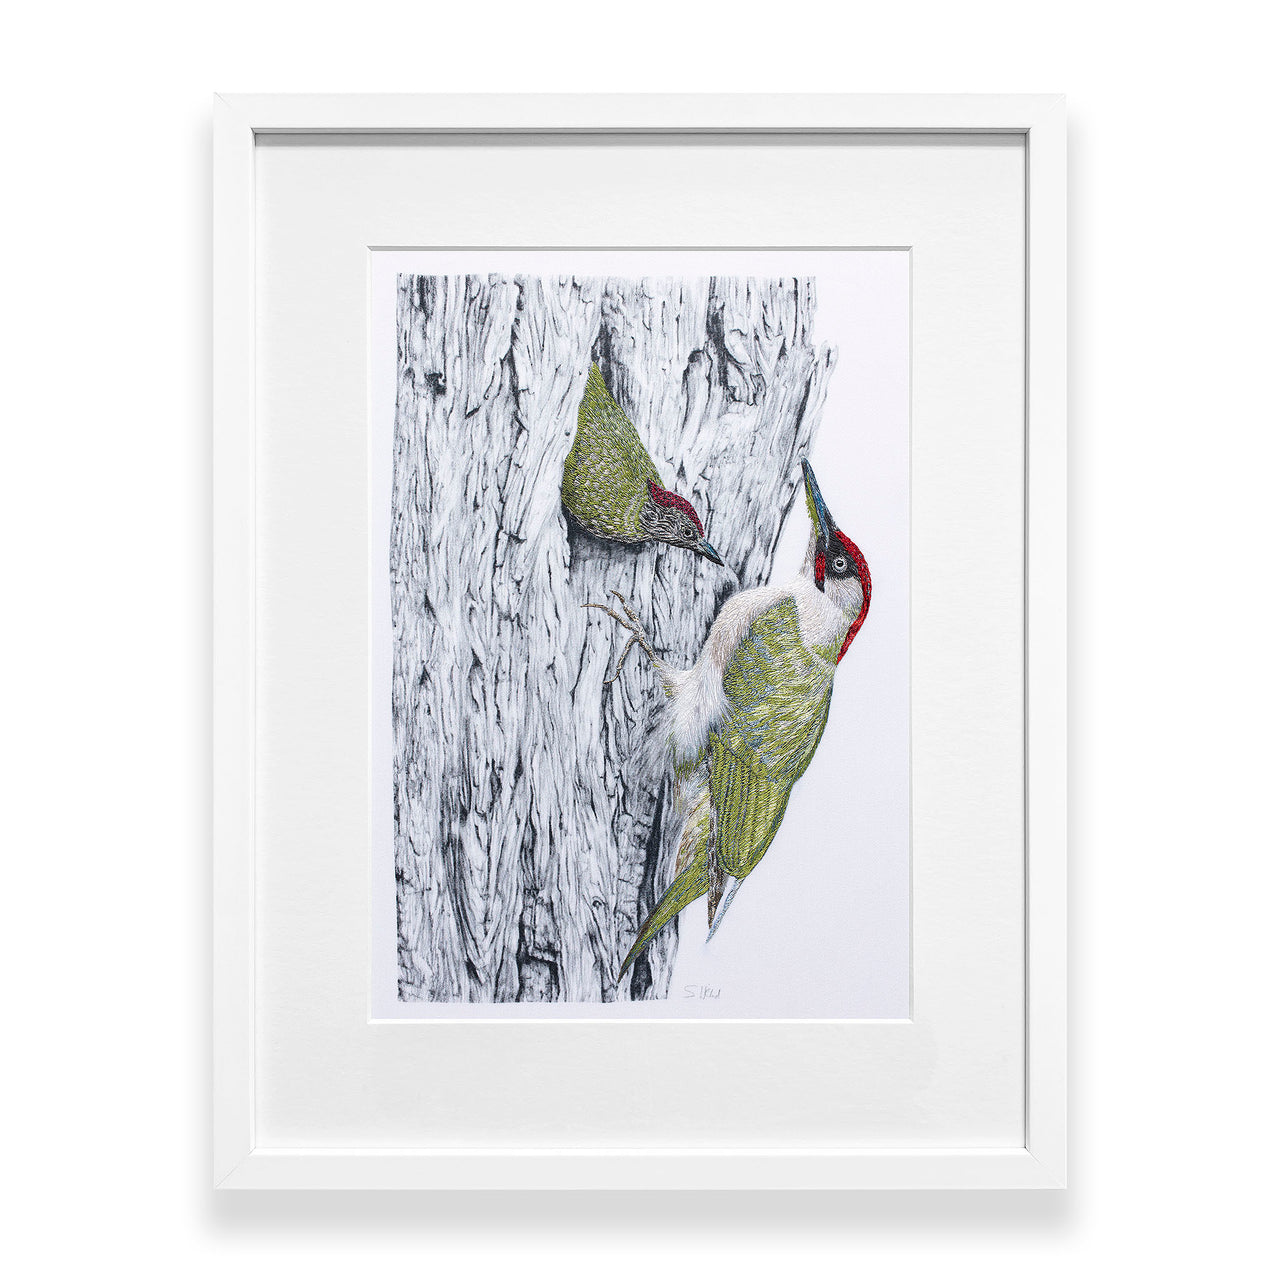 Pencil drawing with hand embroidery Woodpecker in a white frame